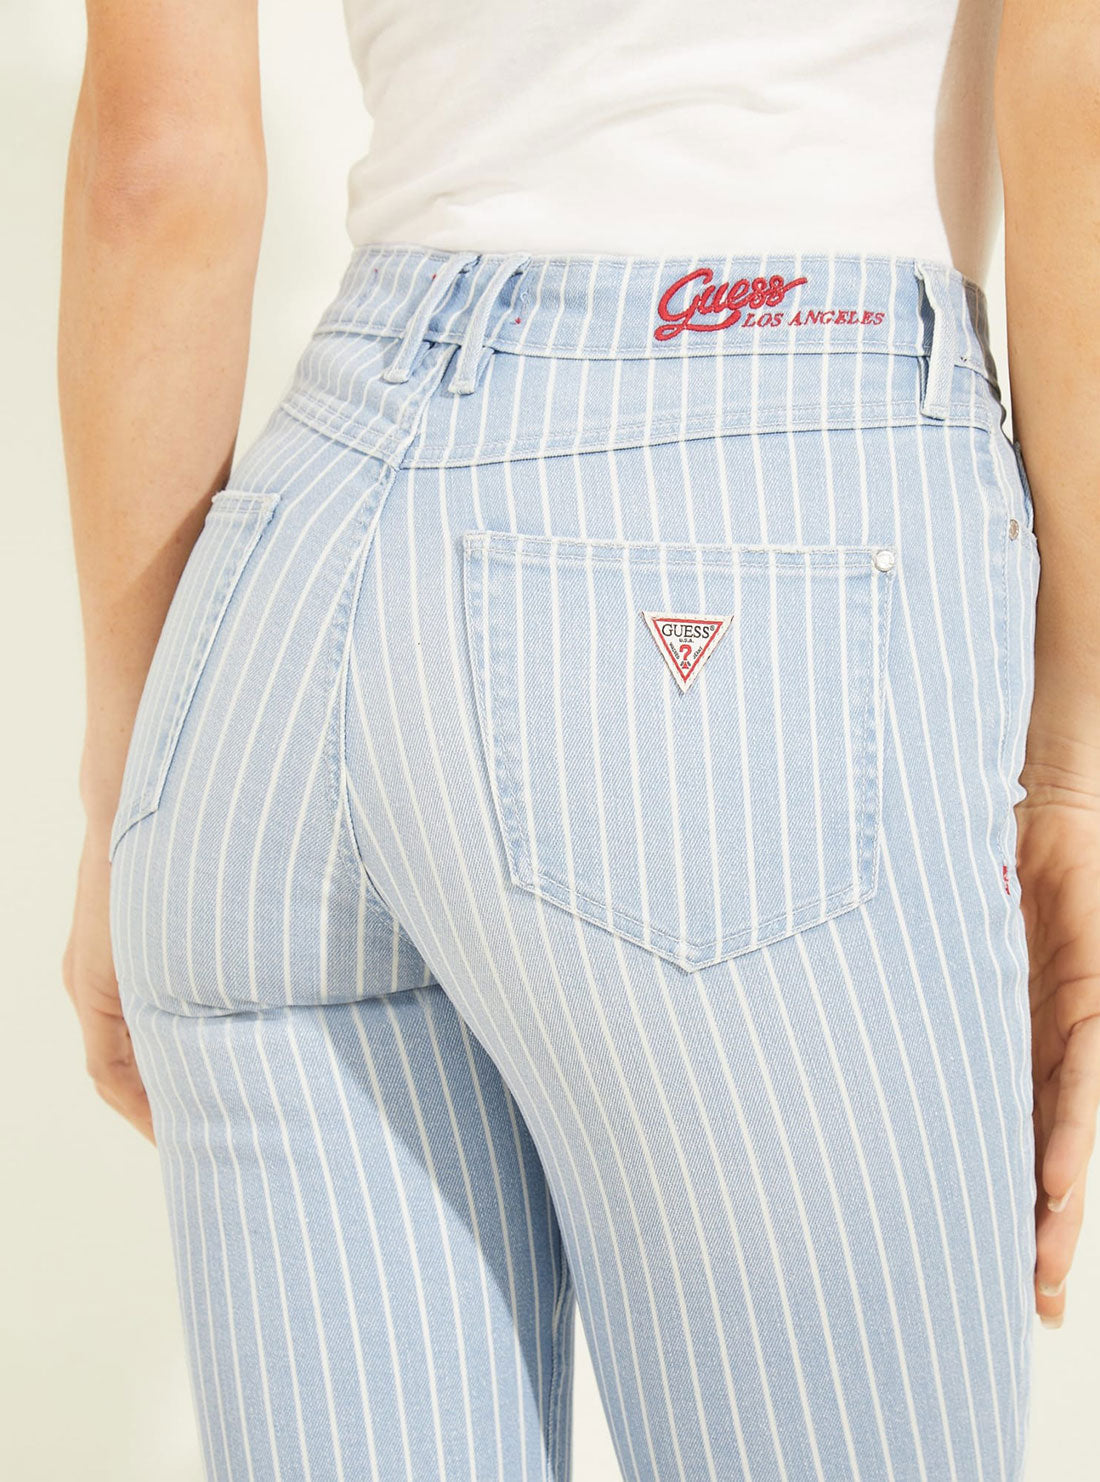 GUESS Womens High-Rise Skinny Fit 1981 Denim Jeans In Pinstripe Light Wash W2GA46D4DN5 Back Detail View